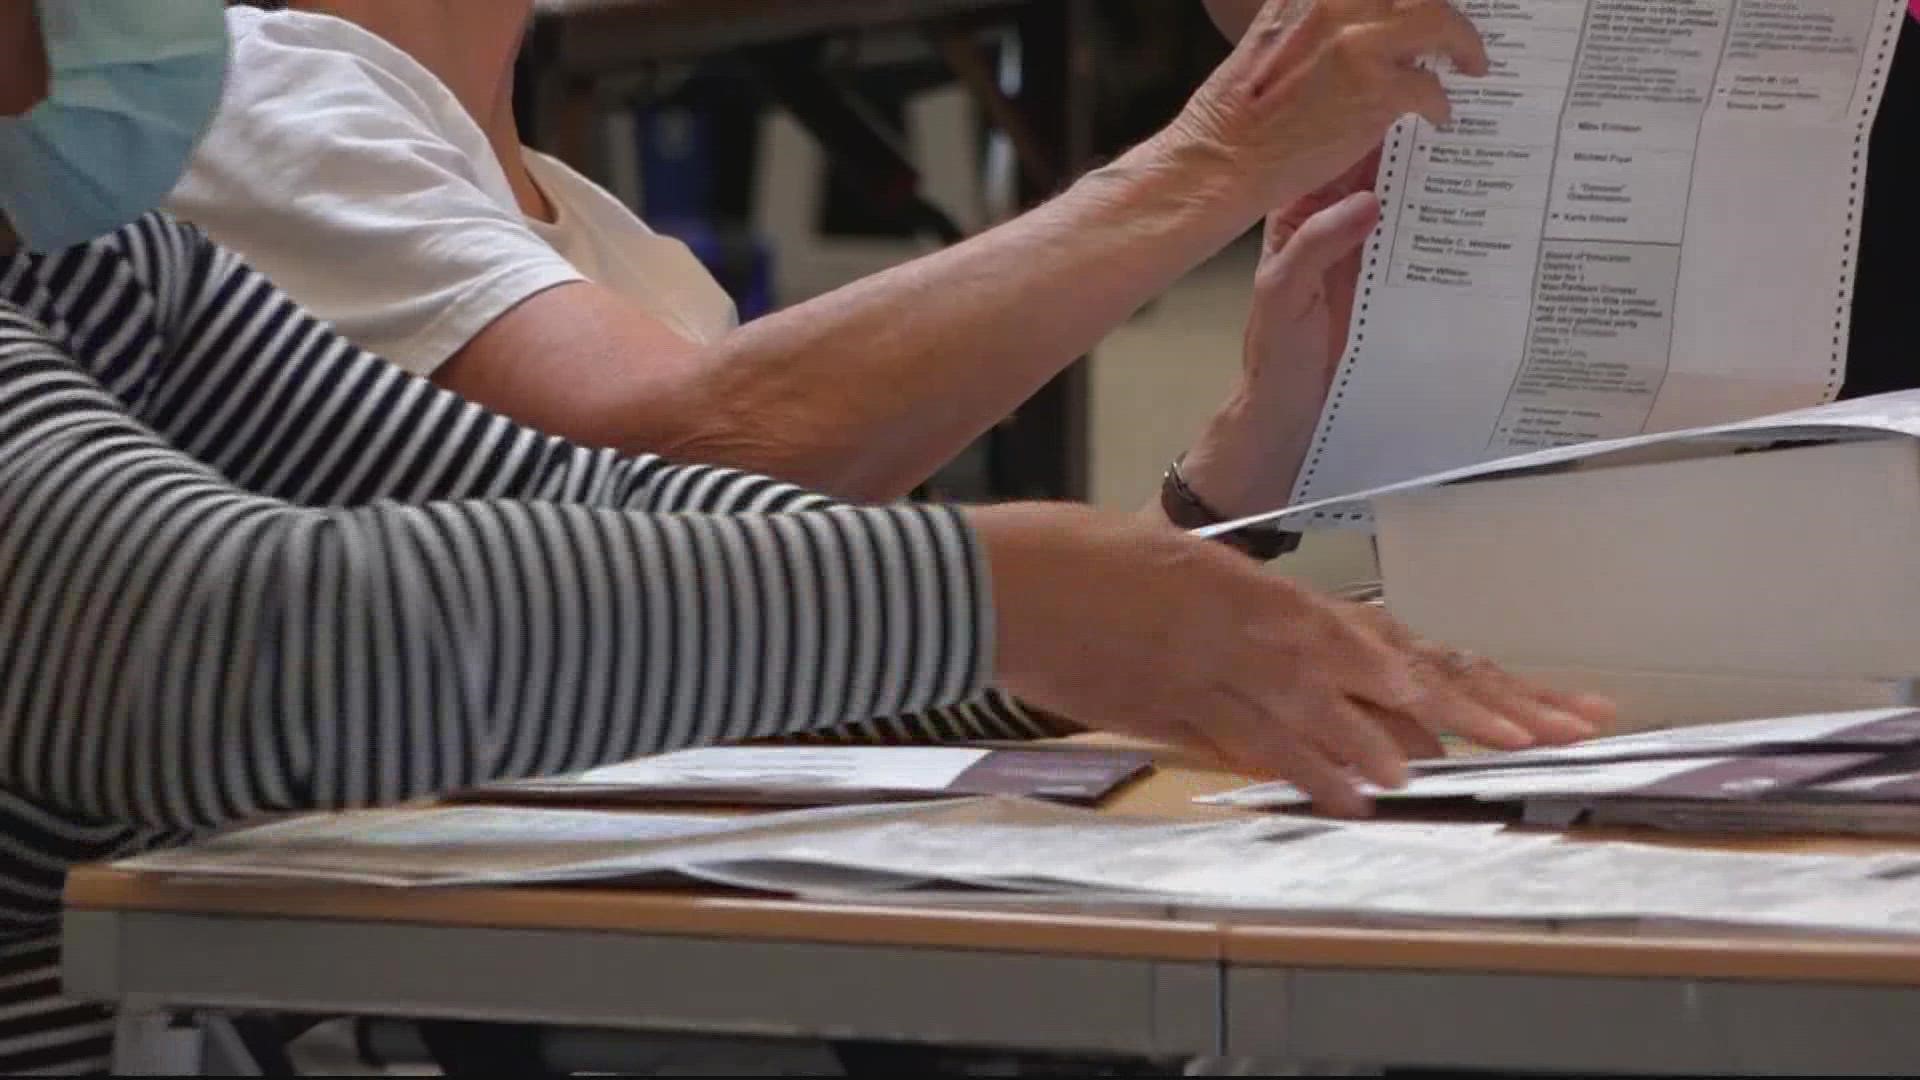 Several races were still undecided as mail-in ballot counting began. The process could take weeks because of the large number of ballots.